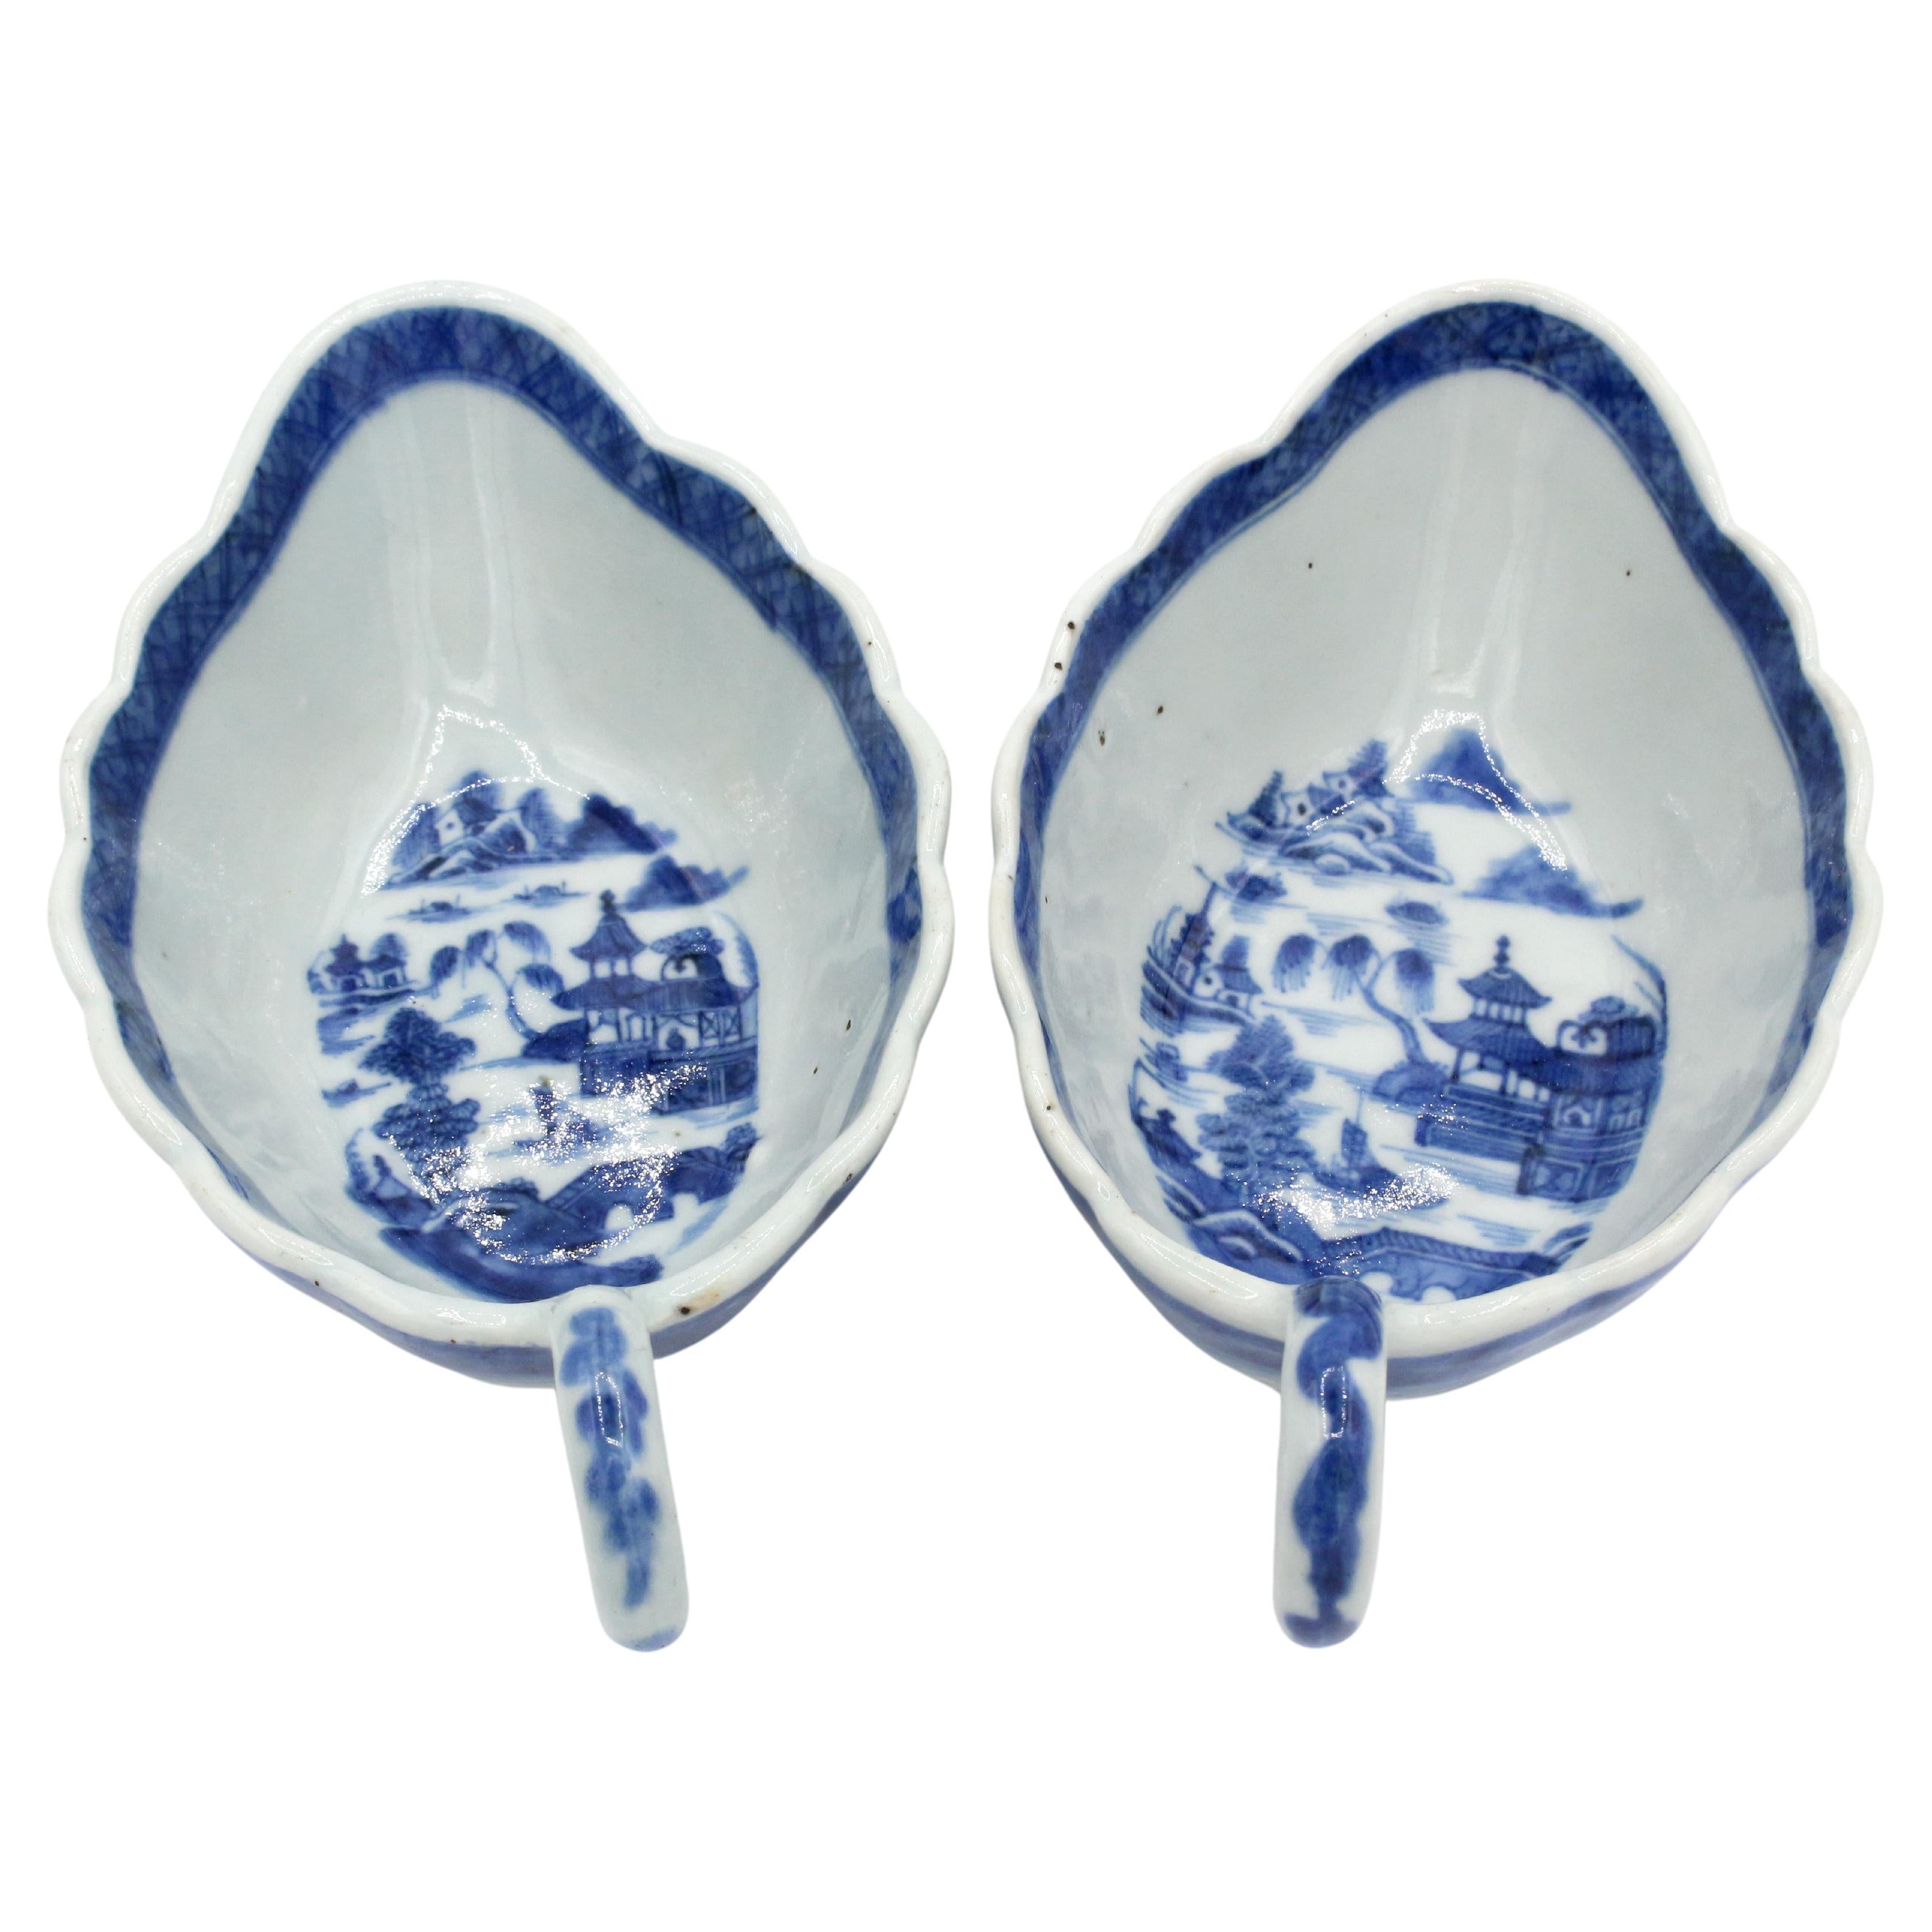 Circa 1830s Pair of Chinese Blue Canton Sauce Boats For Sale